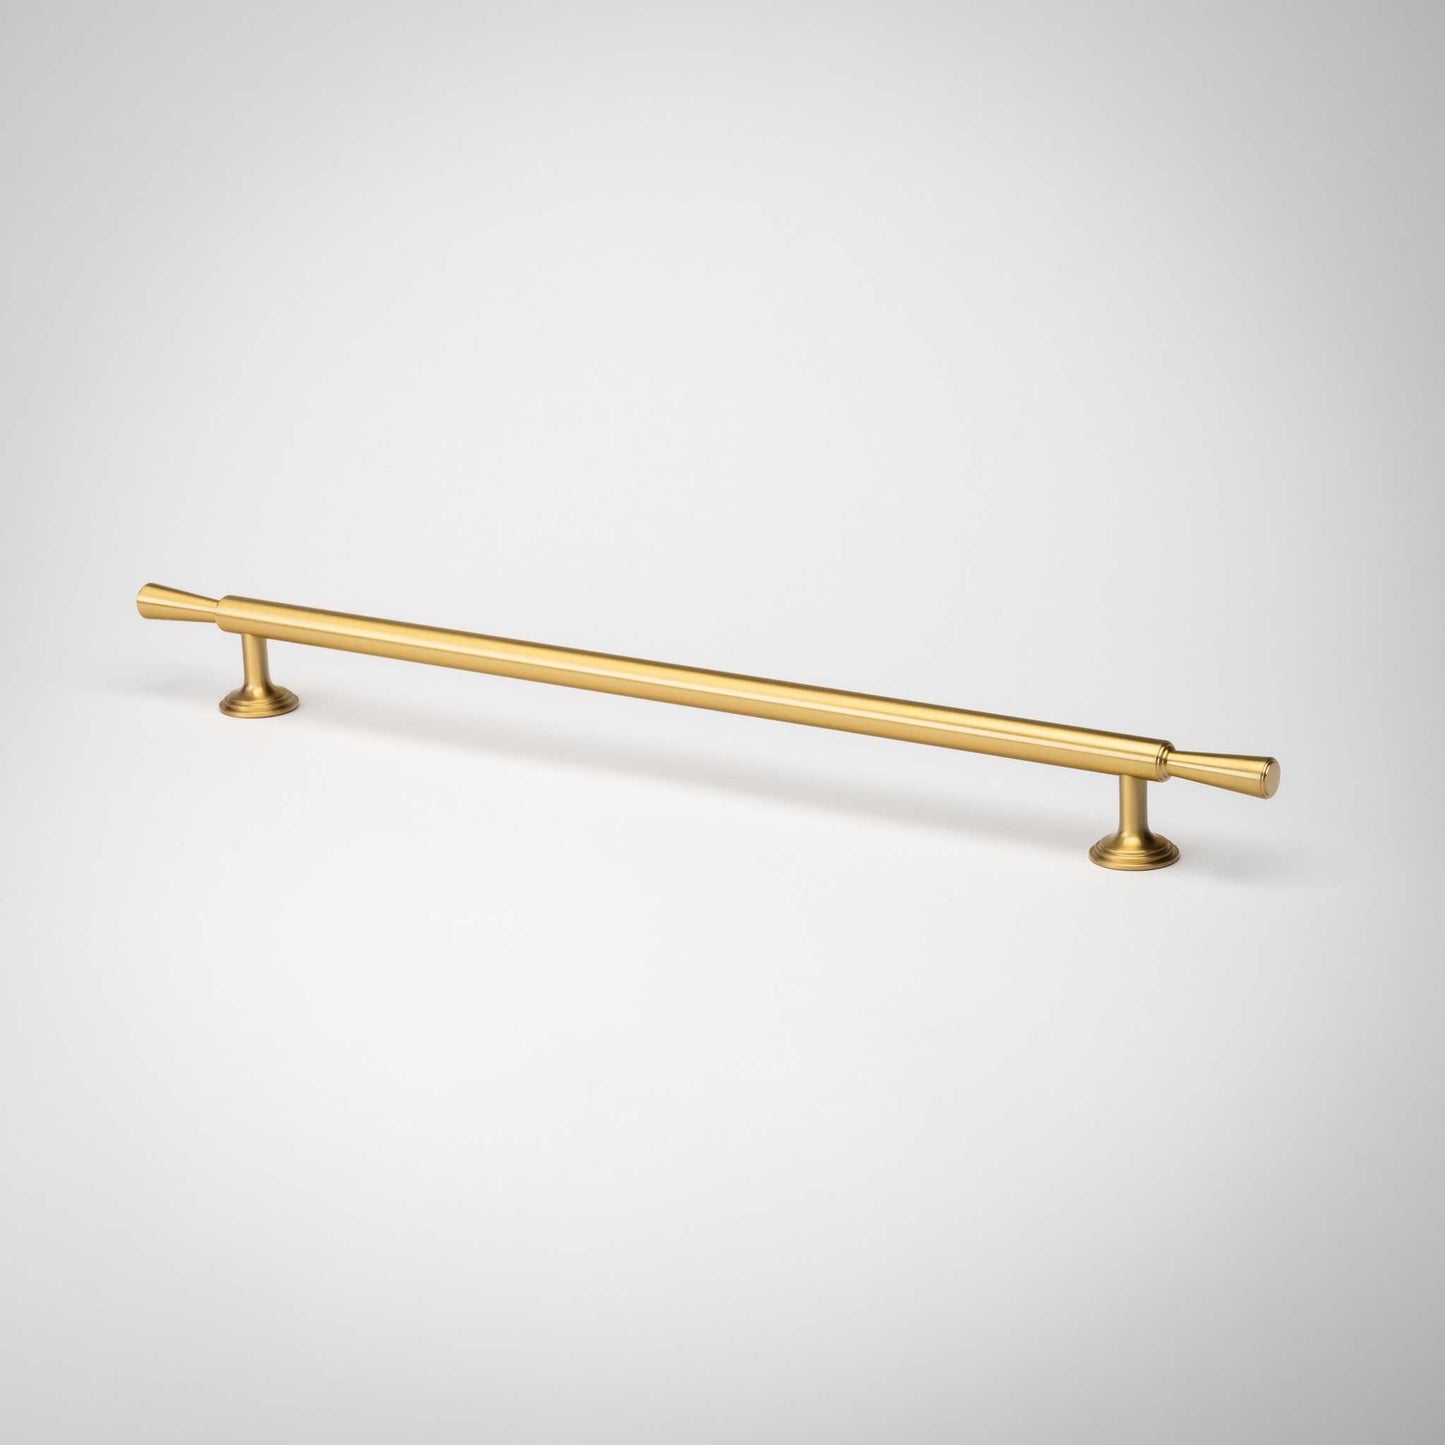 Tuxedo, Solid Brass Cabinet Pulls


Meet Tuxedo, our new deco-inspired cabinet knob. A sleek, classic design with a modern edge. Its beautiful "stacked" base and tapered ends add visual interest, repullTuxedo, Solid Brass Cabinet Pulls